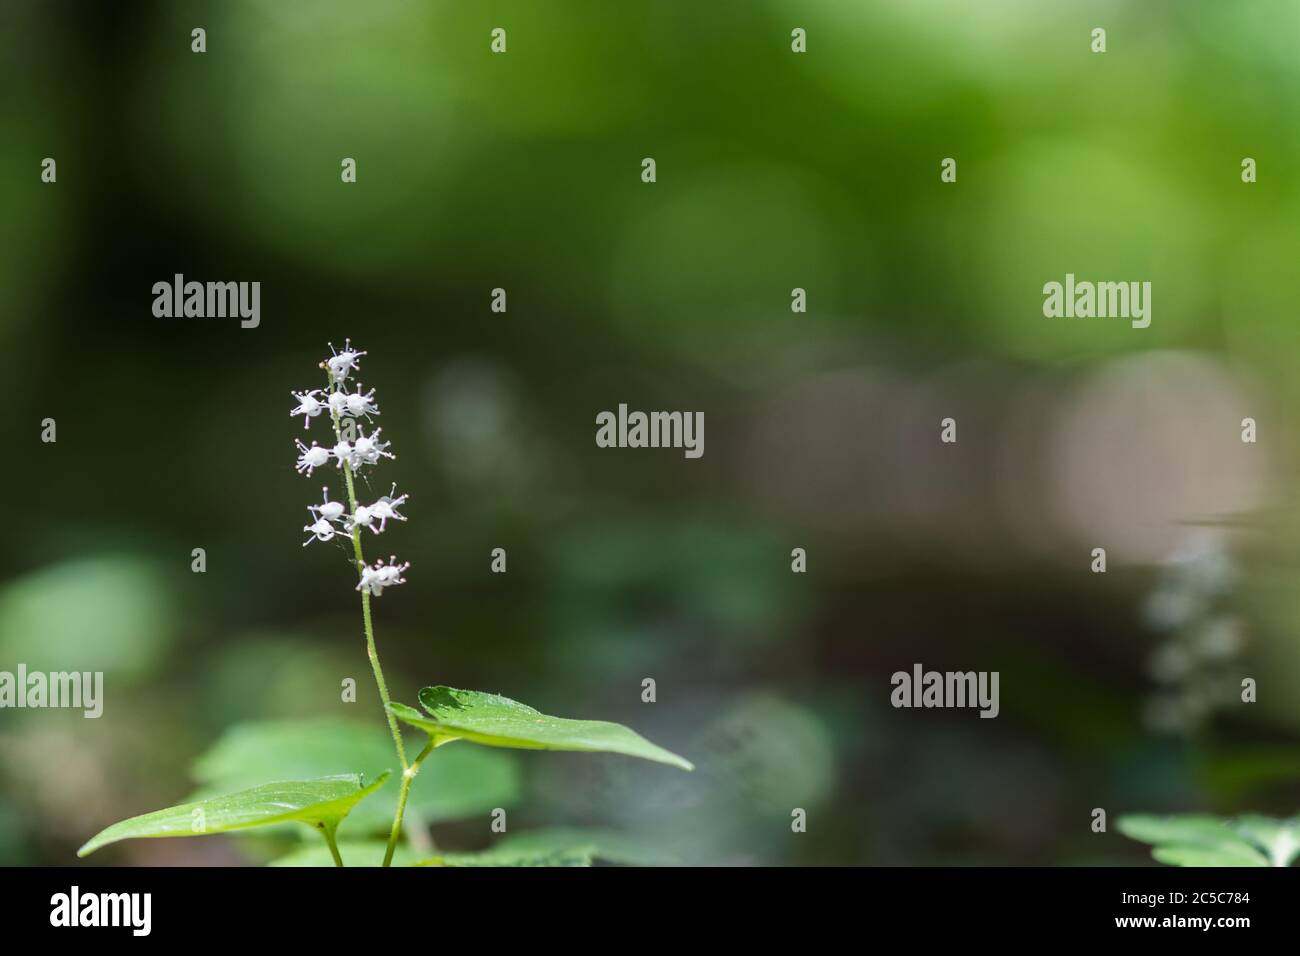 Close up of a False lily of the valley in a low perspective image Stock Photo